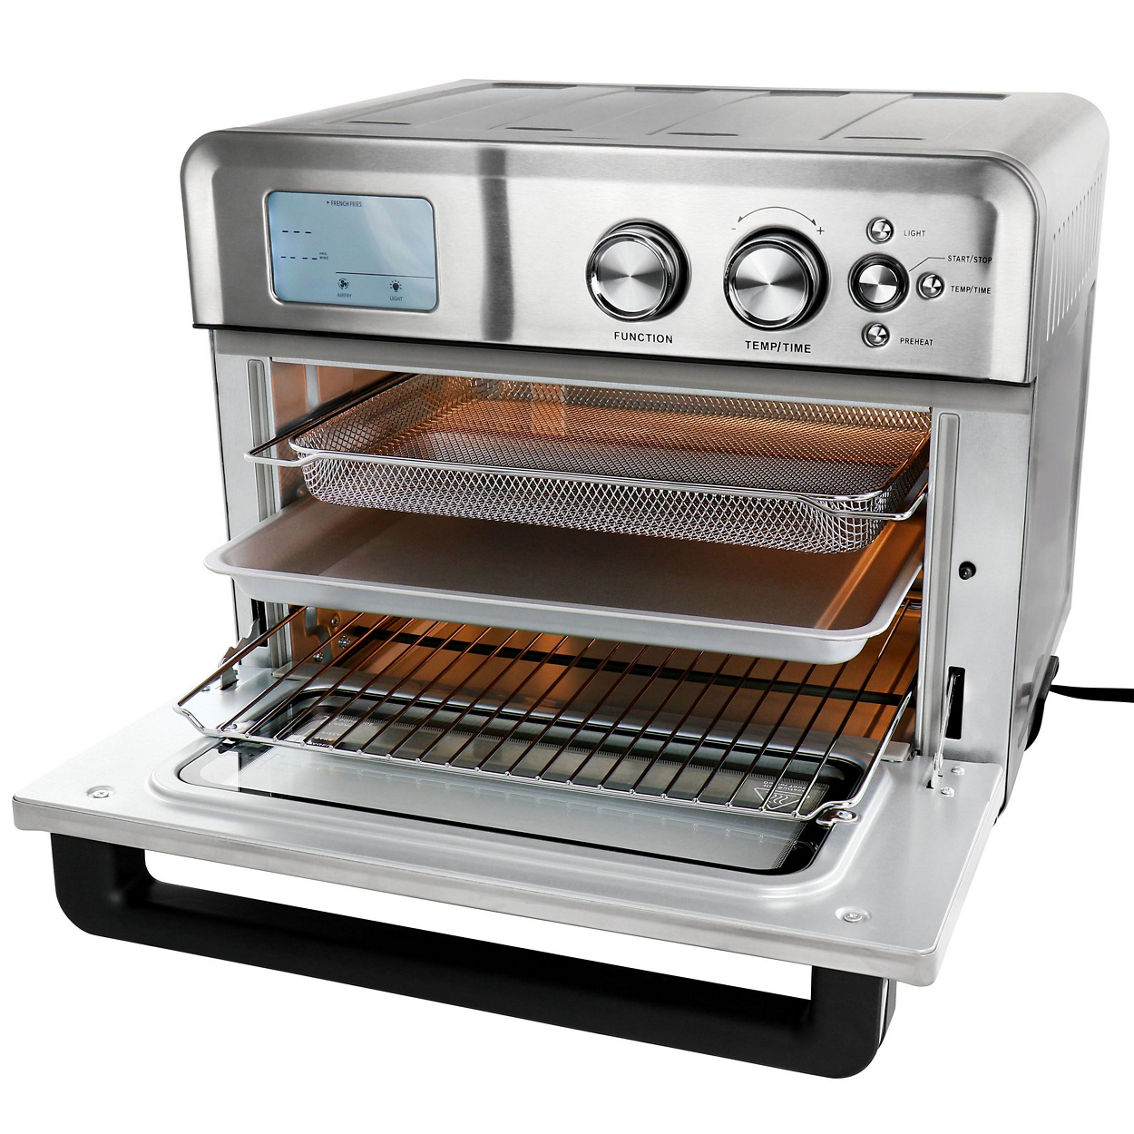 MegaChef Multifunction Air Fryer Toaster Oven with 21 Presets - Image 2 of 5